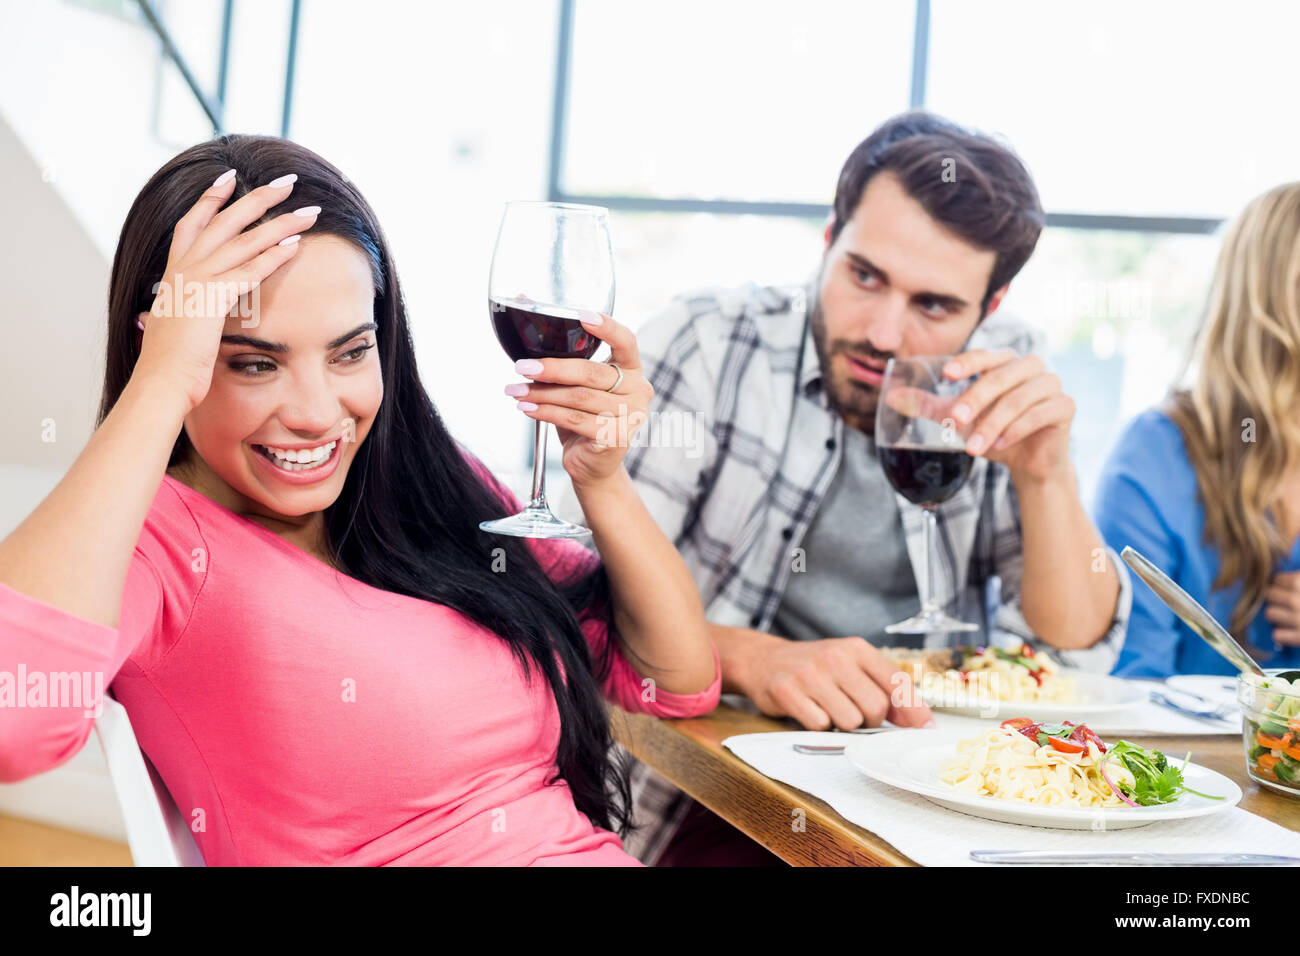 Man looking drunk woman with wine glass Stock Photo